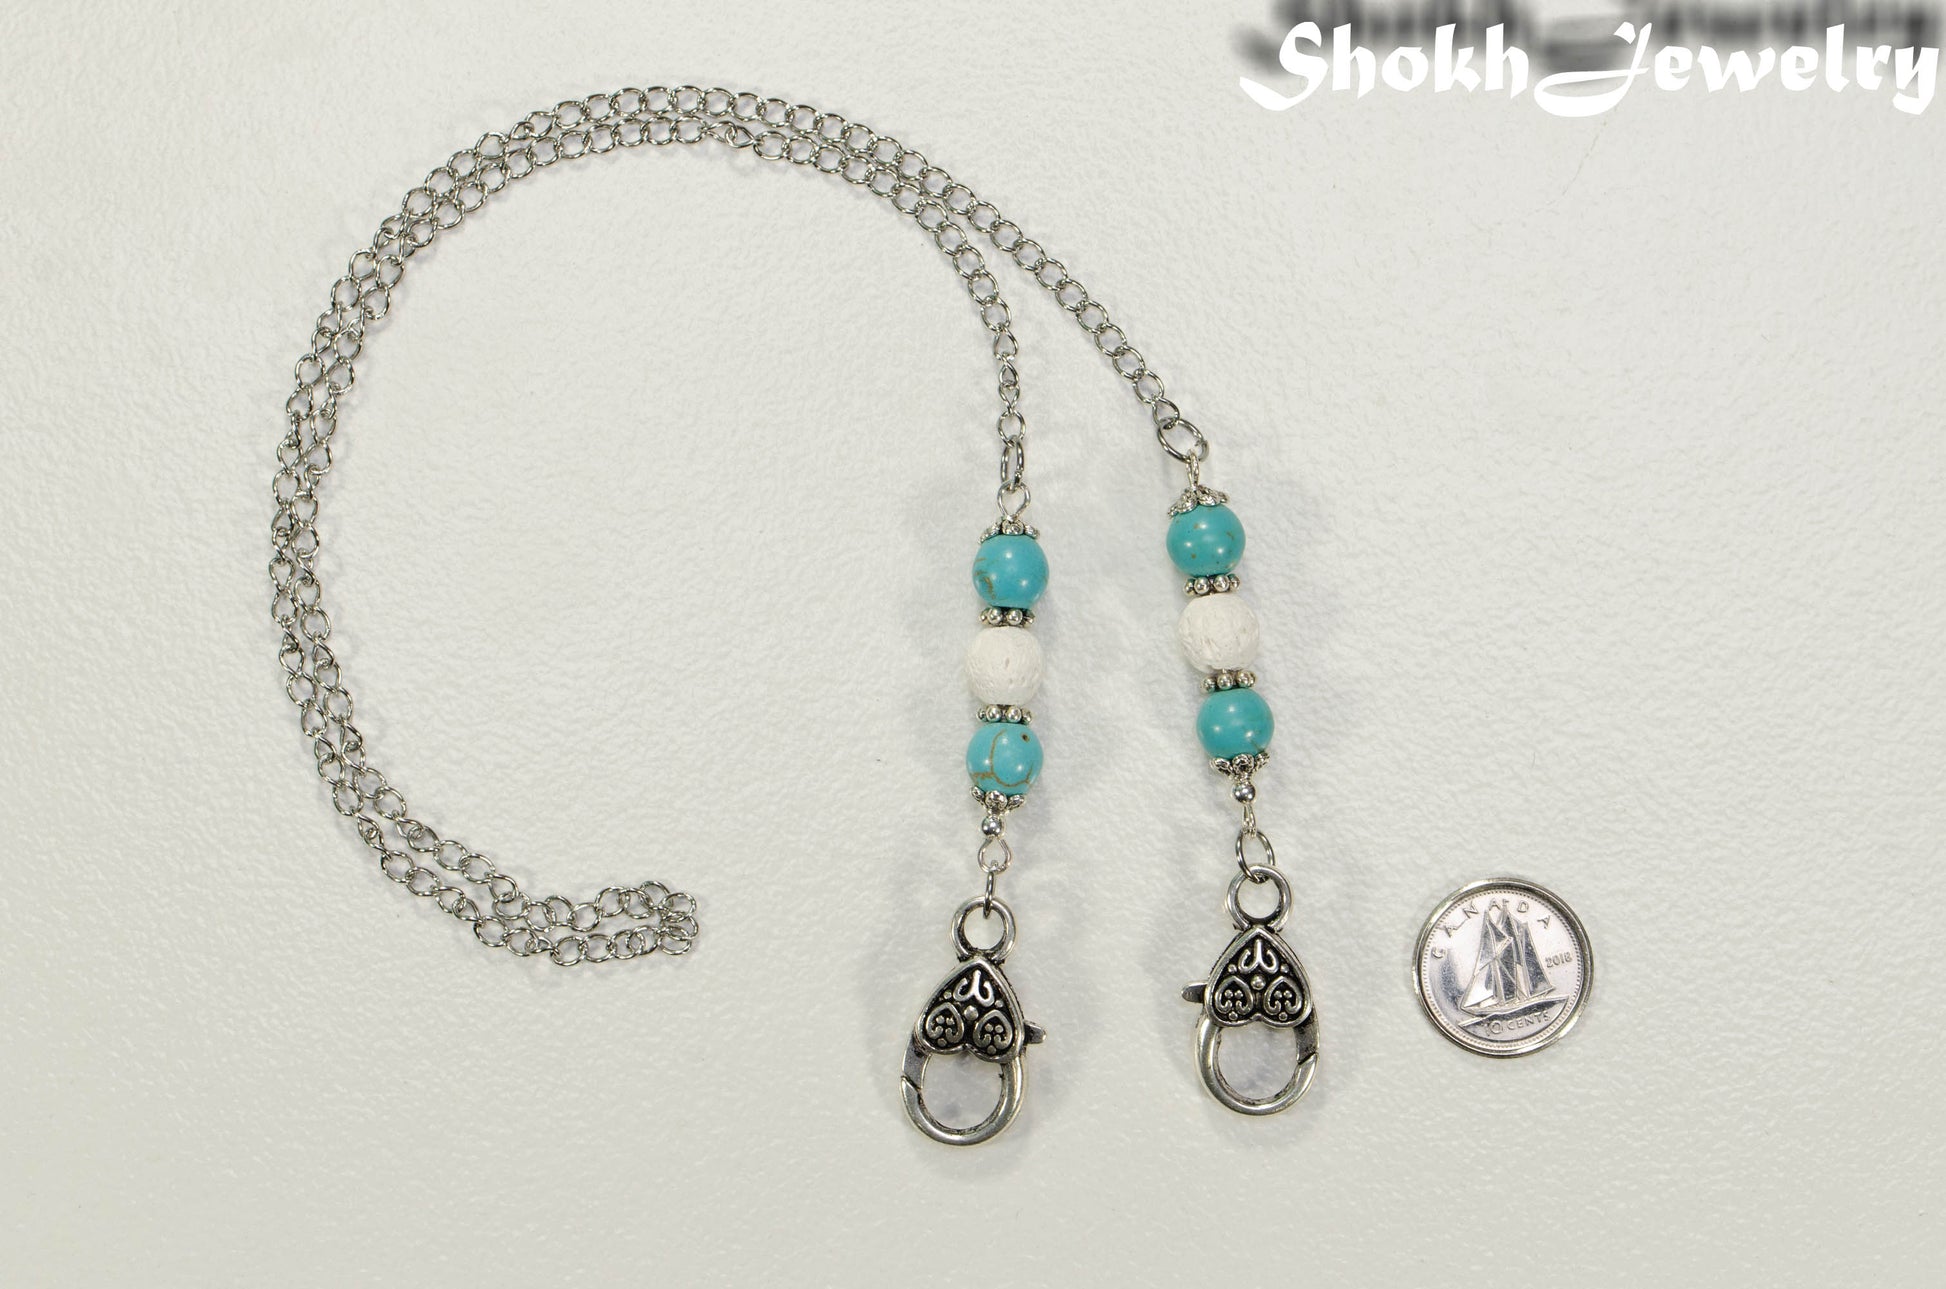 8mm Turquoise Howlite and White Lava Stone Eyeglass Chain beside a dime.